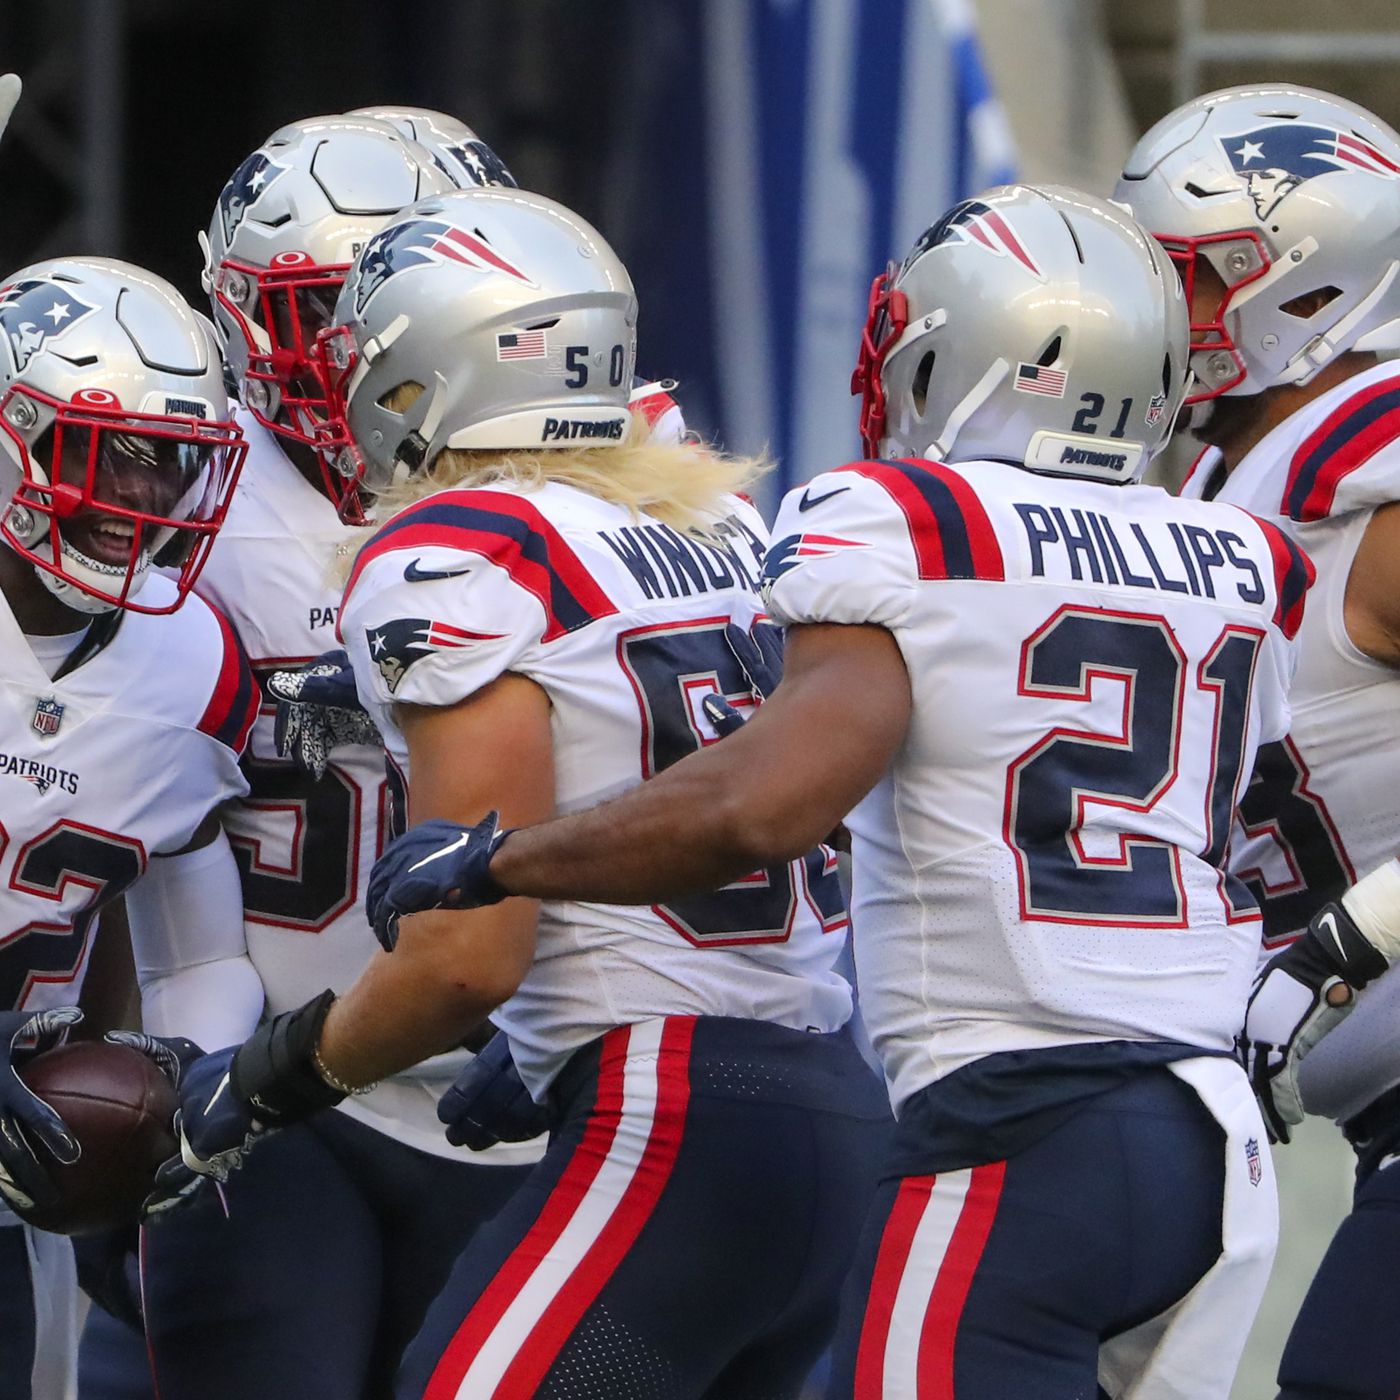 How to watch Patriots vs Raiders: TV, radio, live streaming - Pats Pulpit